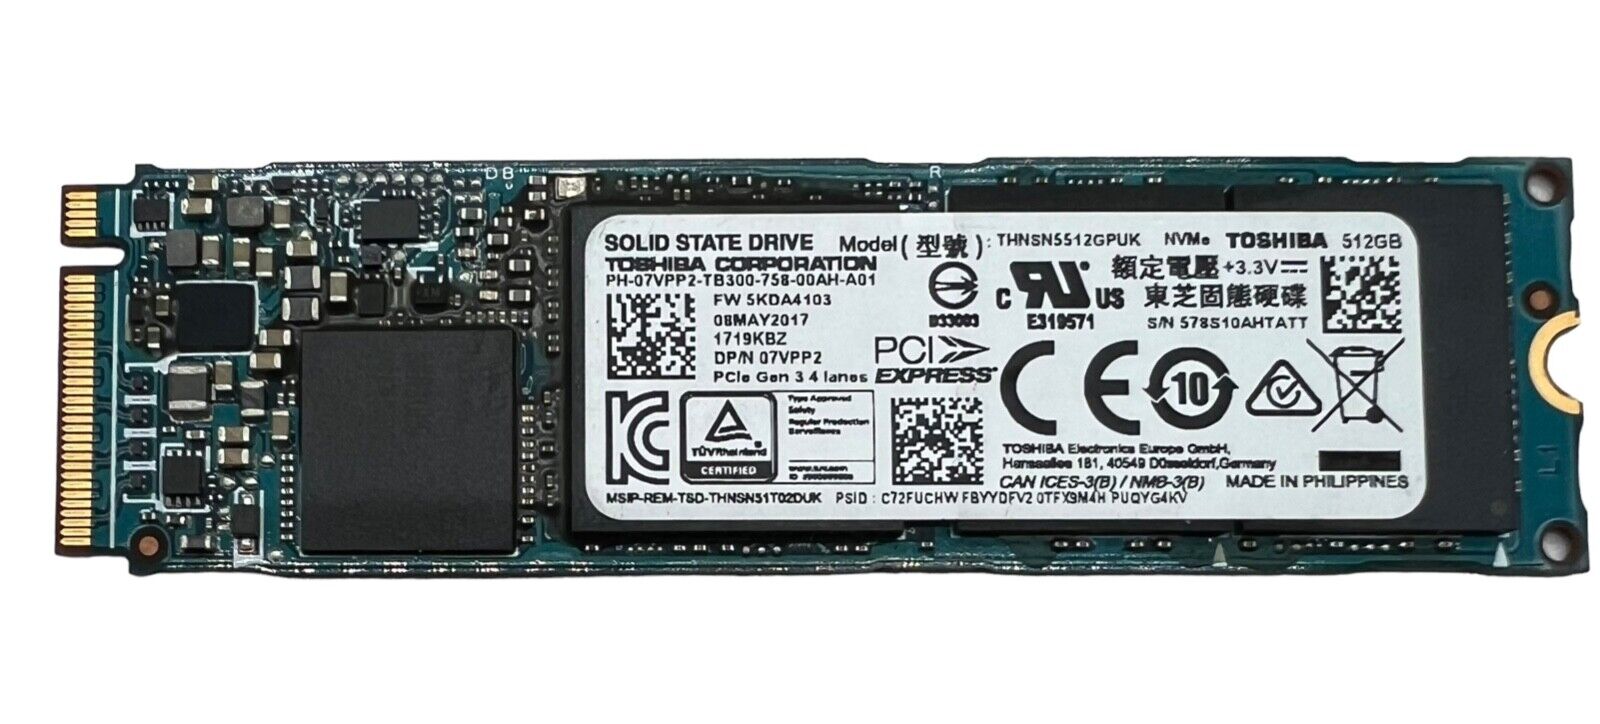 Toshiba 512GB Nvme SSD Solid State Drive THNSN5512GPUK